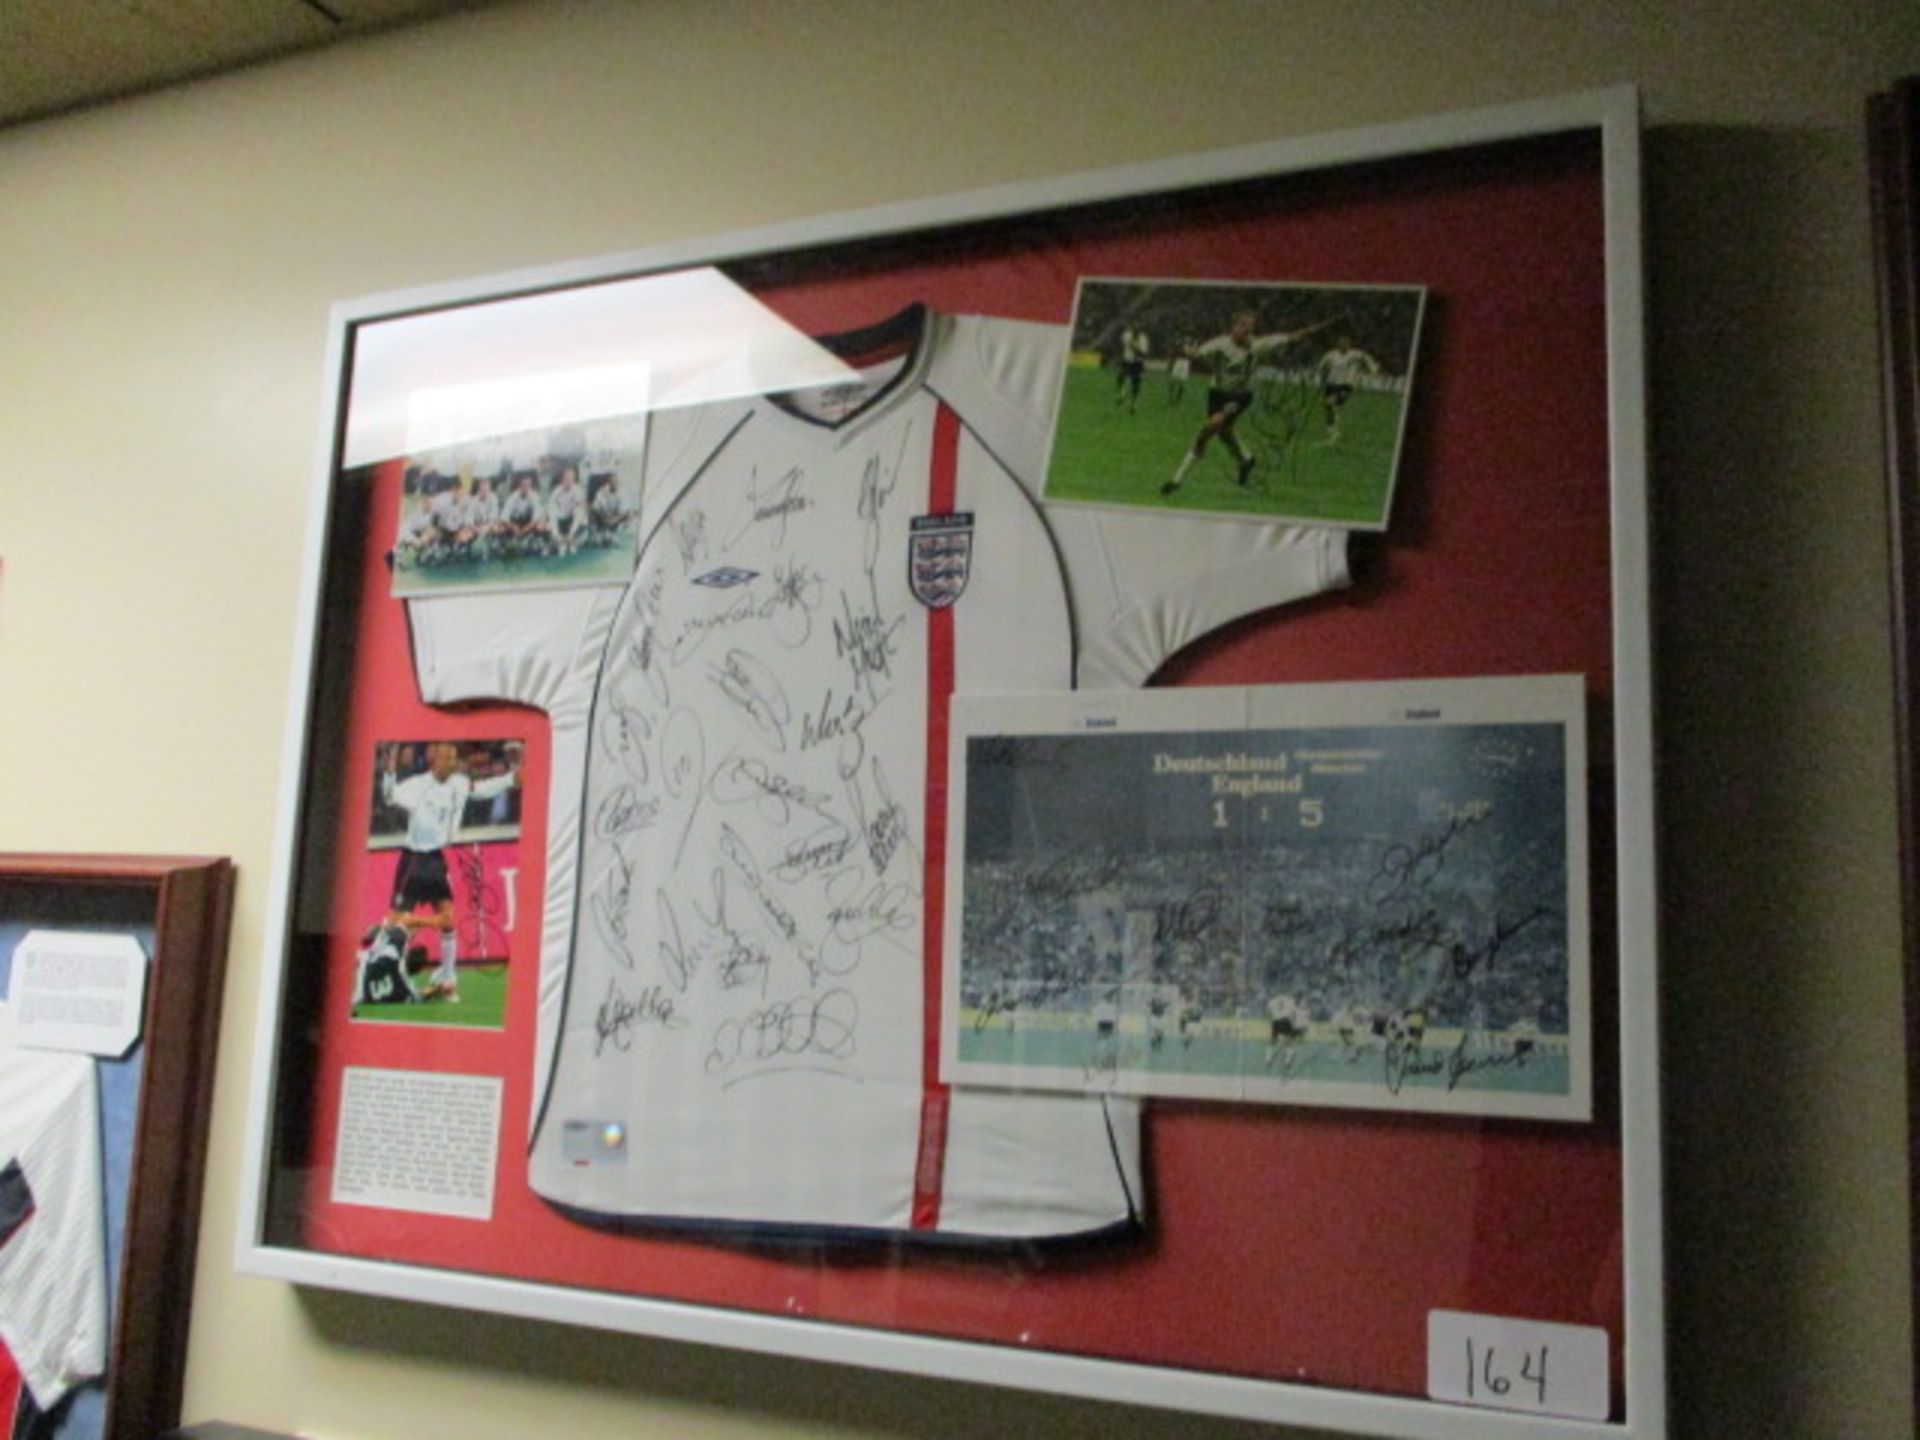 England replica shirt and photos of England squad that helped England qualify for 2002 World Cup - Image 2 of 4